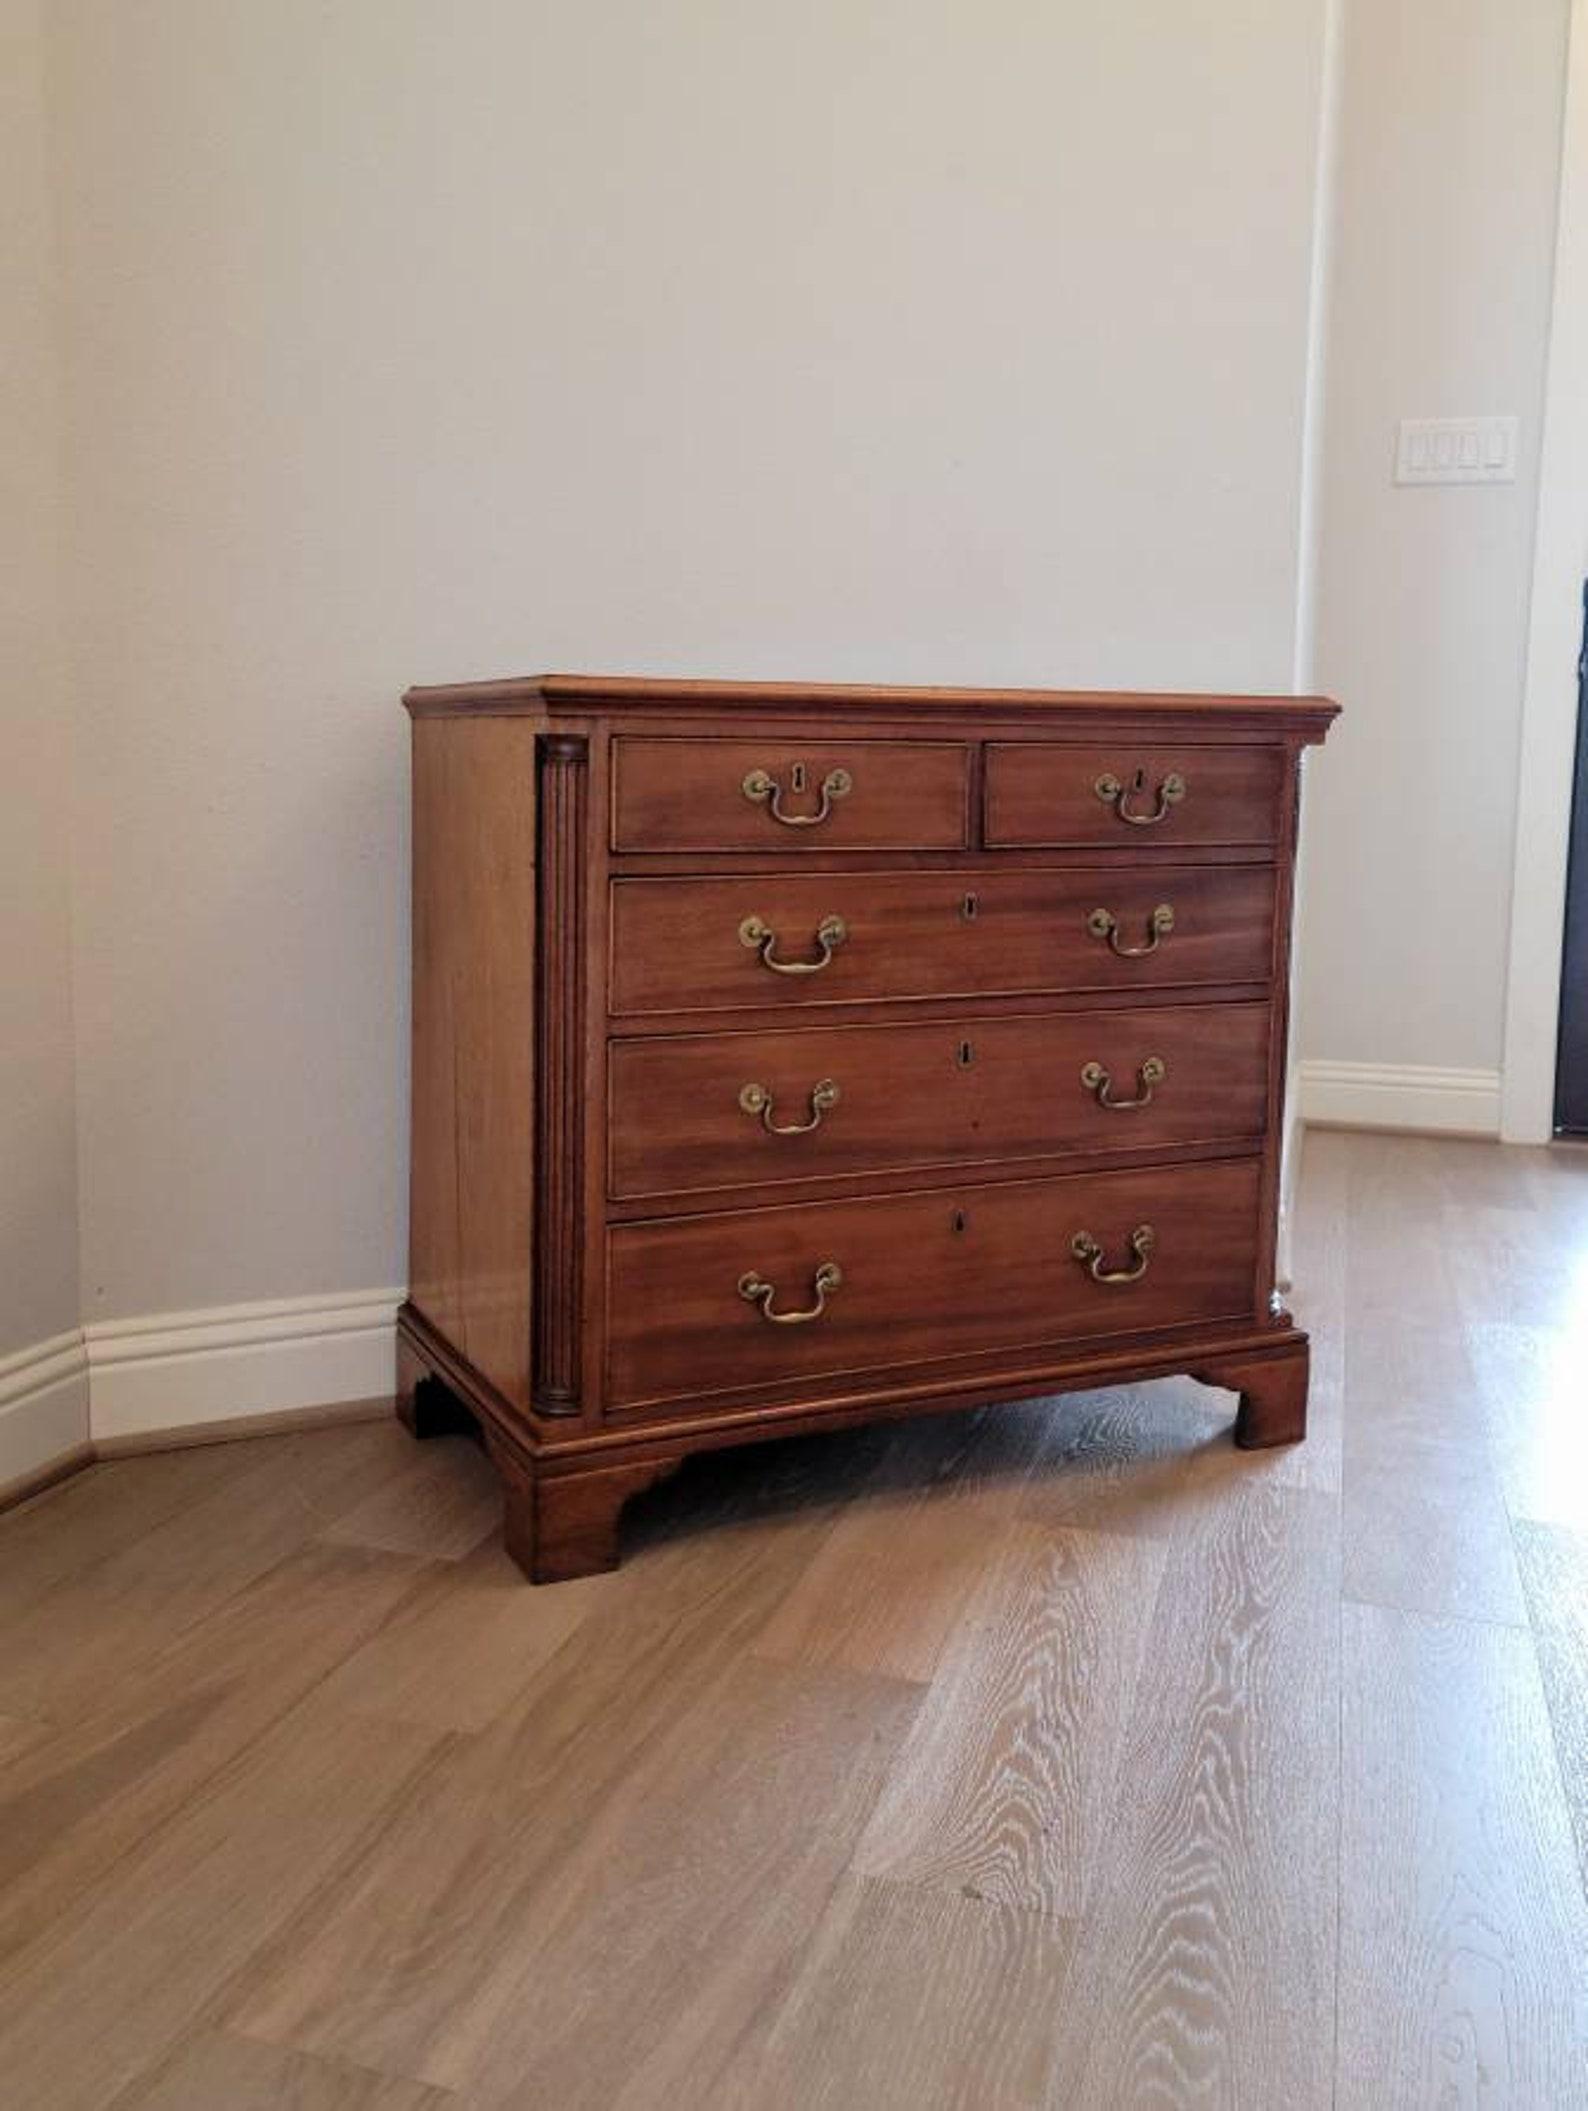 Hand-Crafted 19th Century American Federal Bachelor's Chest of Drawers